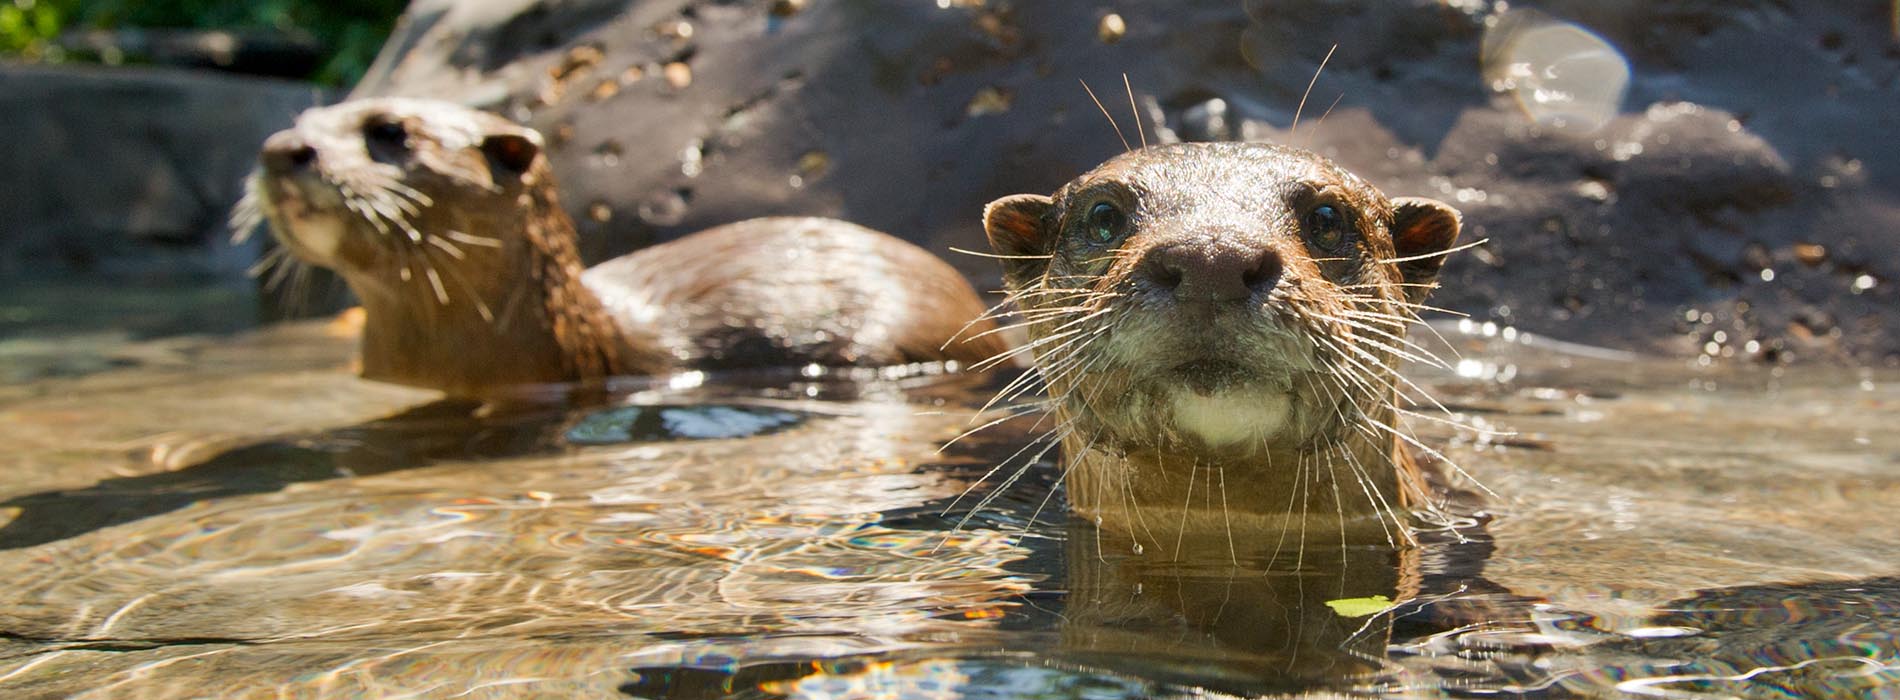 Two otters play in water